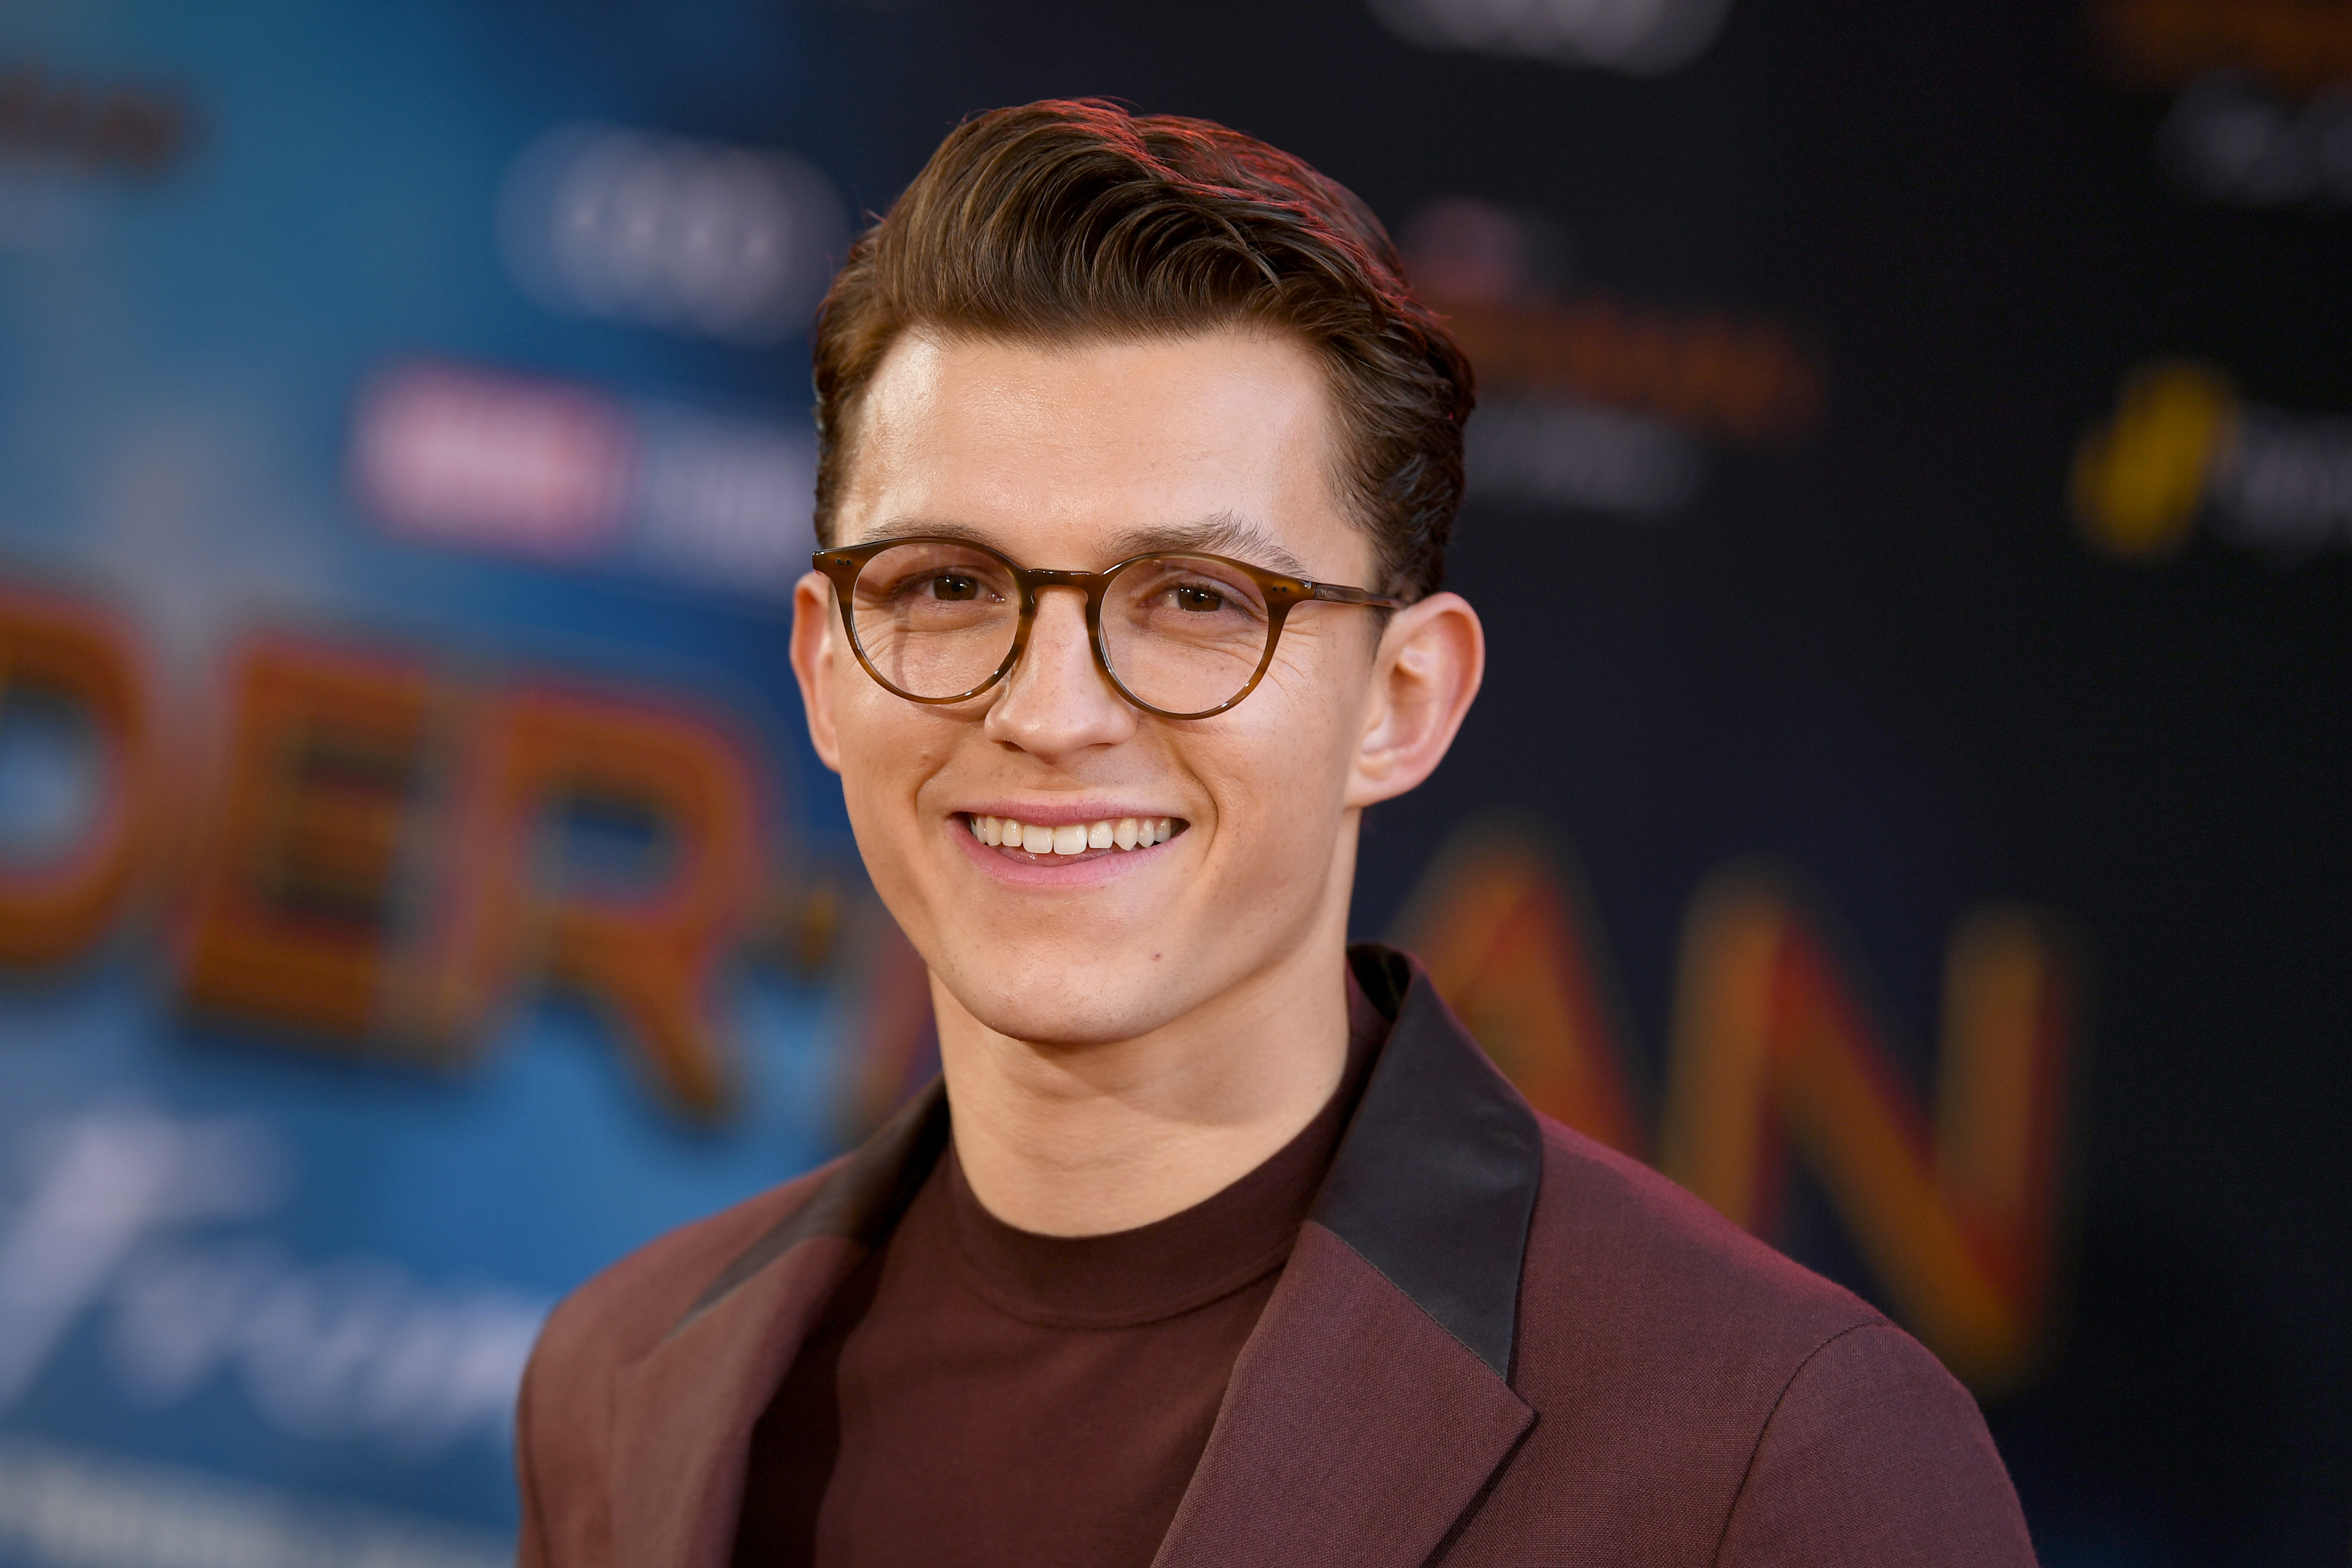 'Spider-Man: No Way Home' star Tom Holland wears a maroon suit over a maroon shirt and glasses.